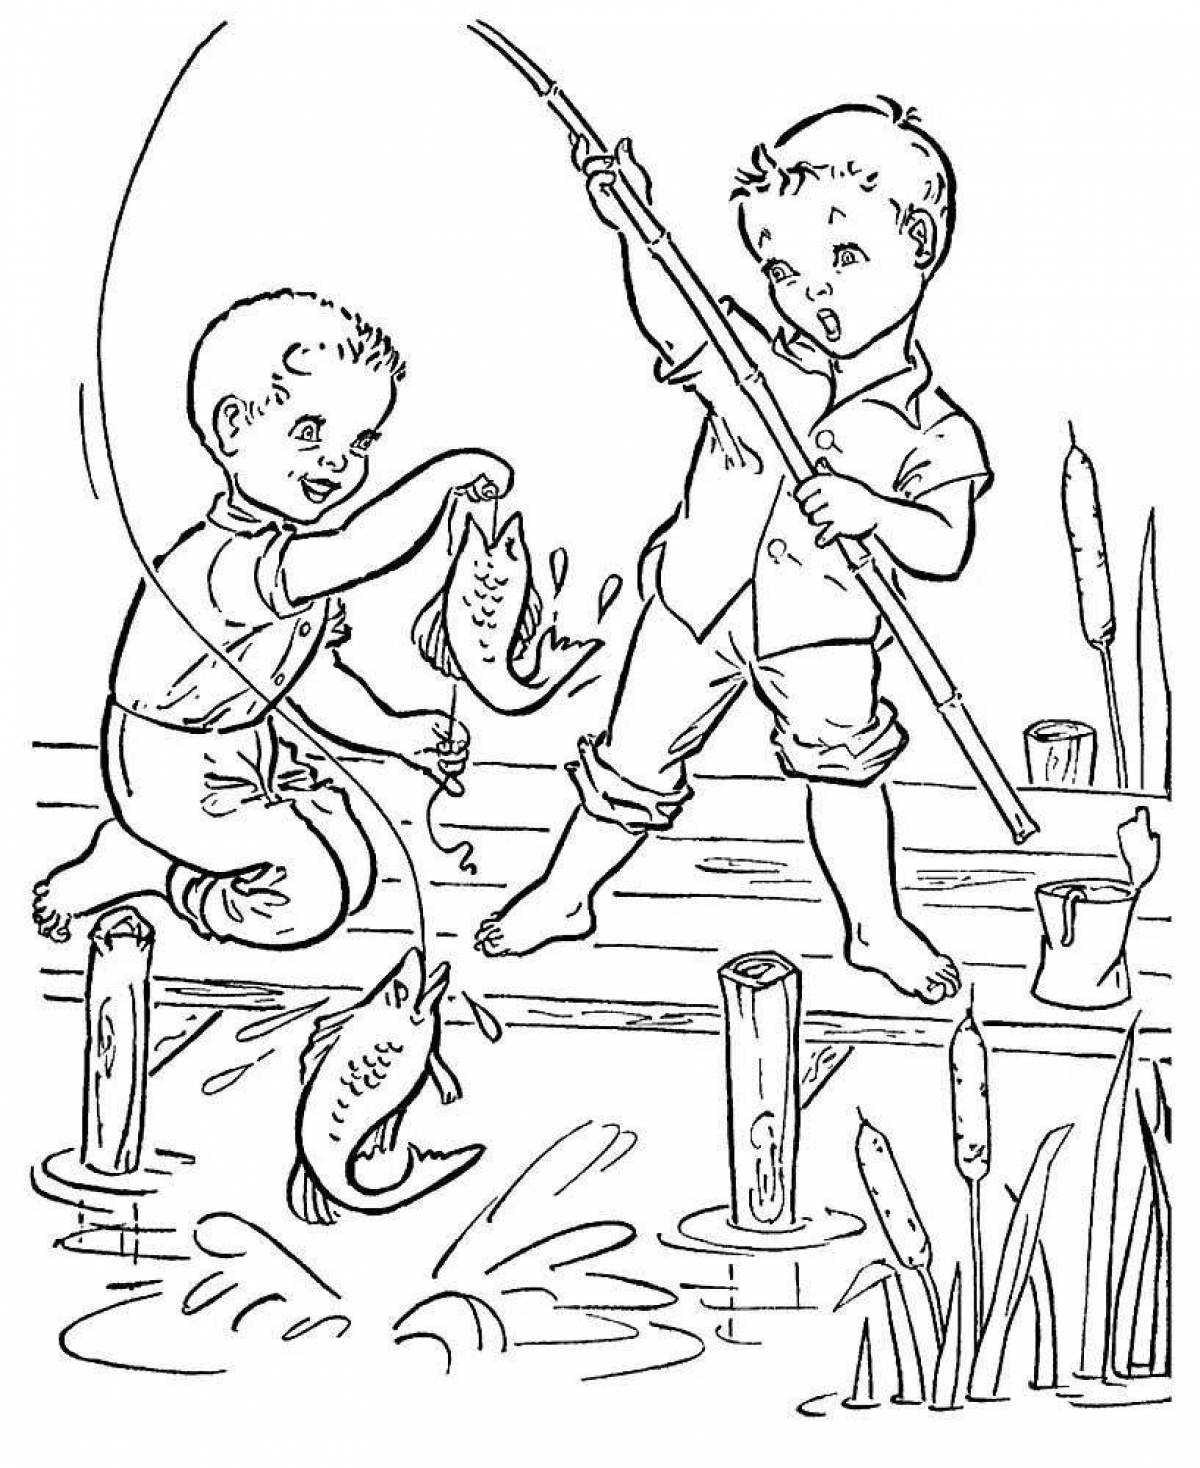 Live winter fishing coloring book